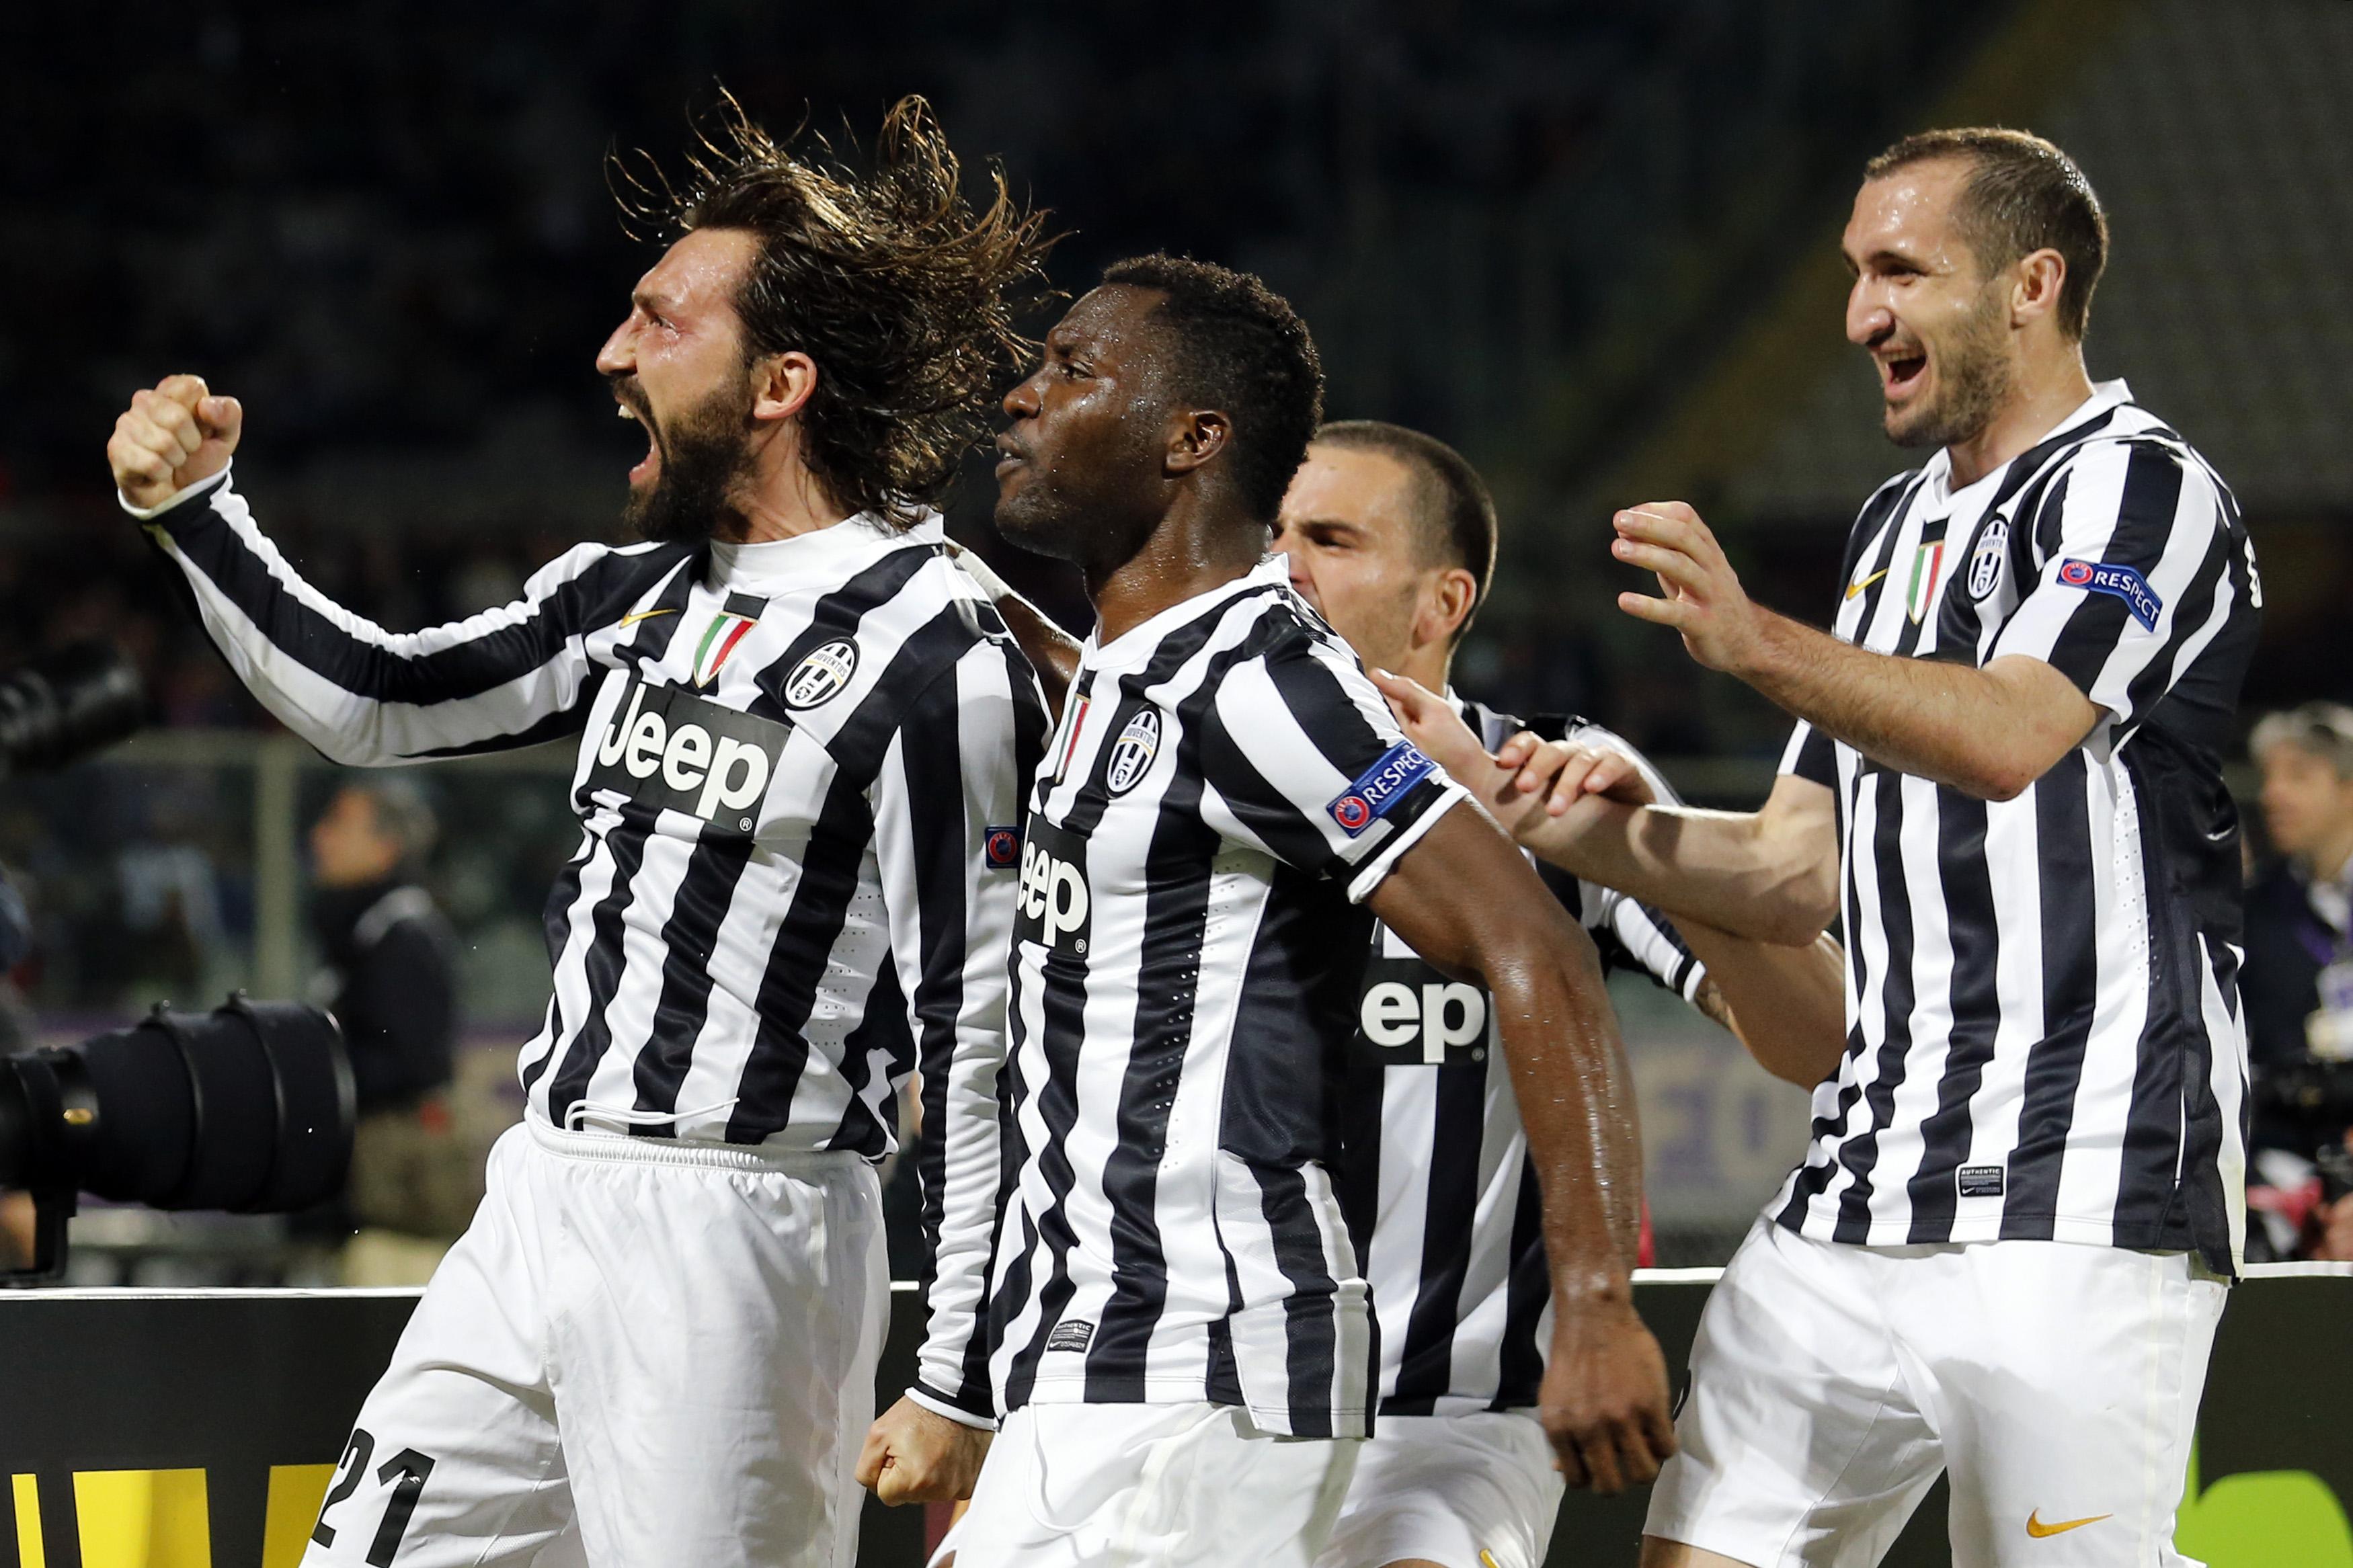 Pirlo puts Juve in last eight with Benfica, Porto